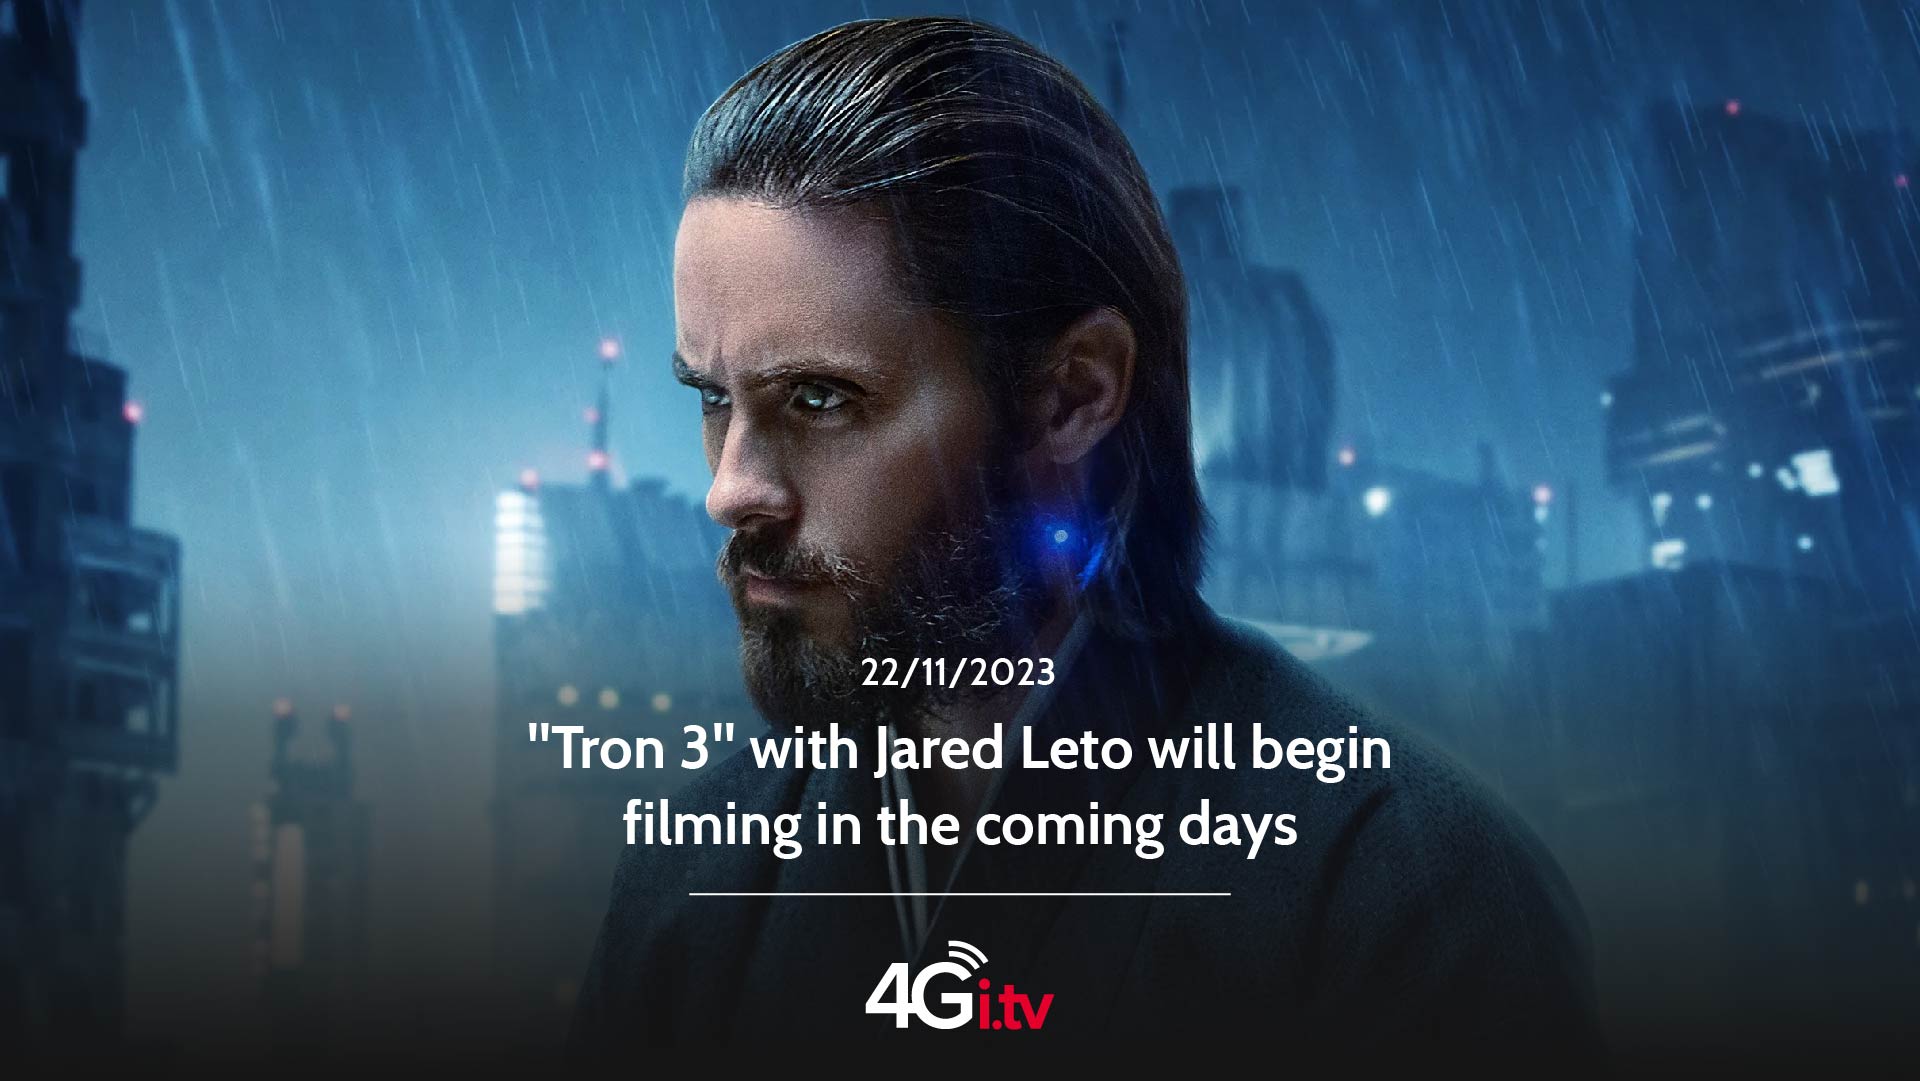 Read more about the article “Tron 3” with Jared Leto will begin filming in the coming days